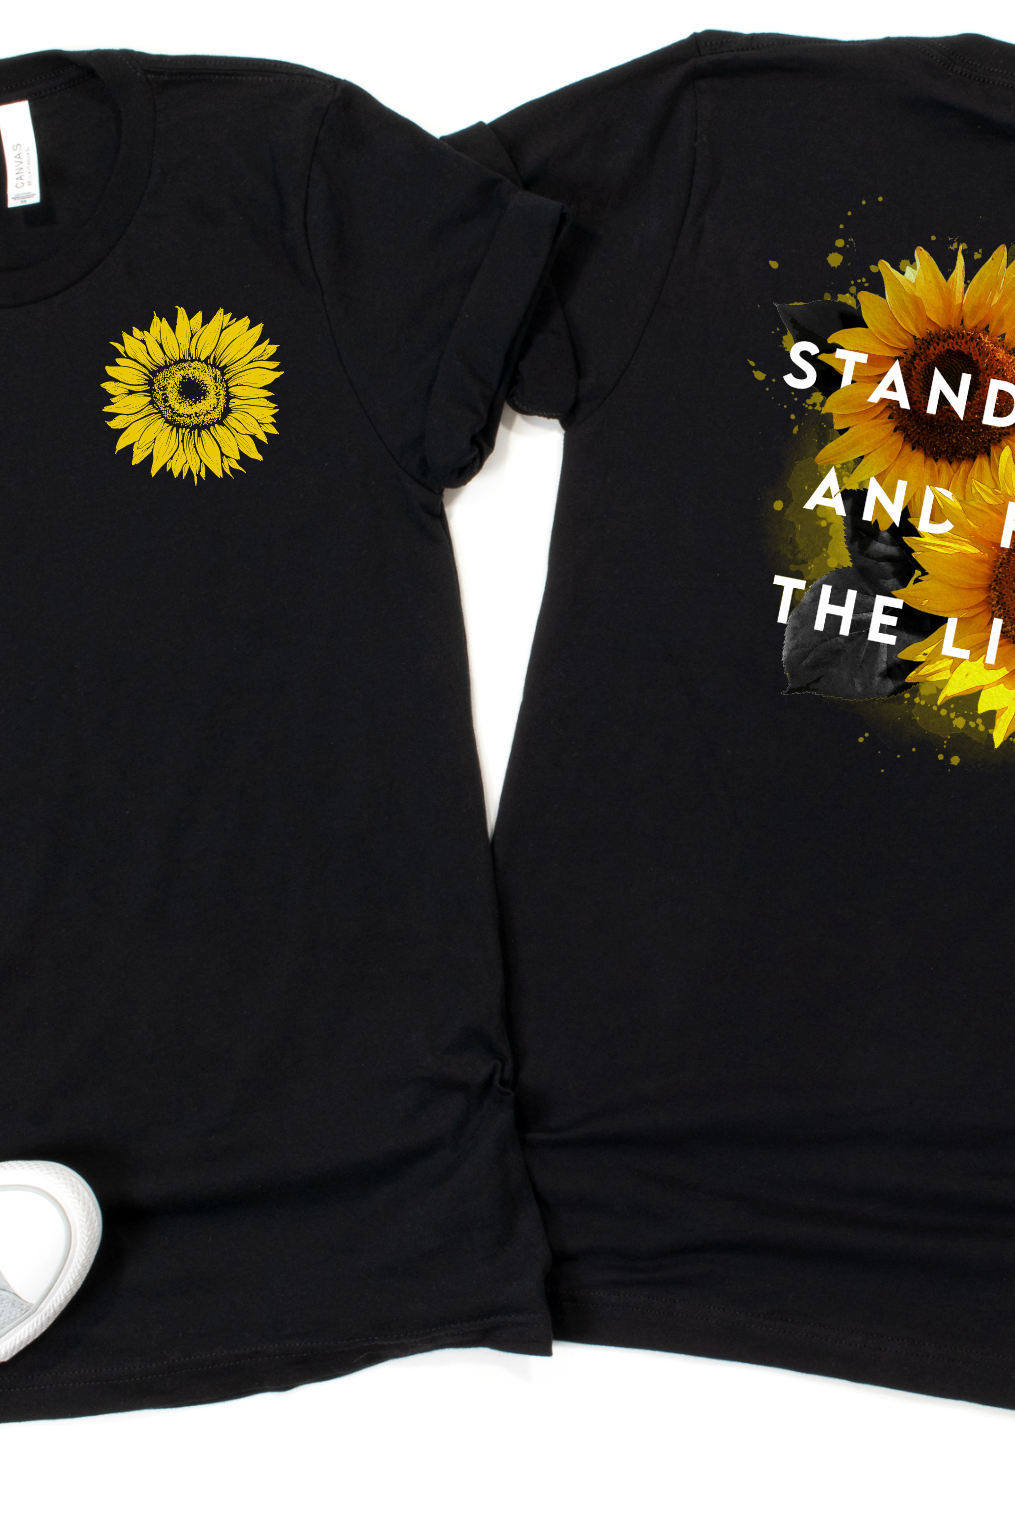 Stand Tall and Find the Light-Graphic Tee- Simply Simpson's Boutique is a Women's Online Fashion Boutique Located in Jupiter, Florida